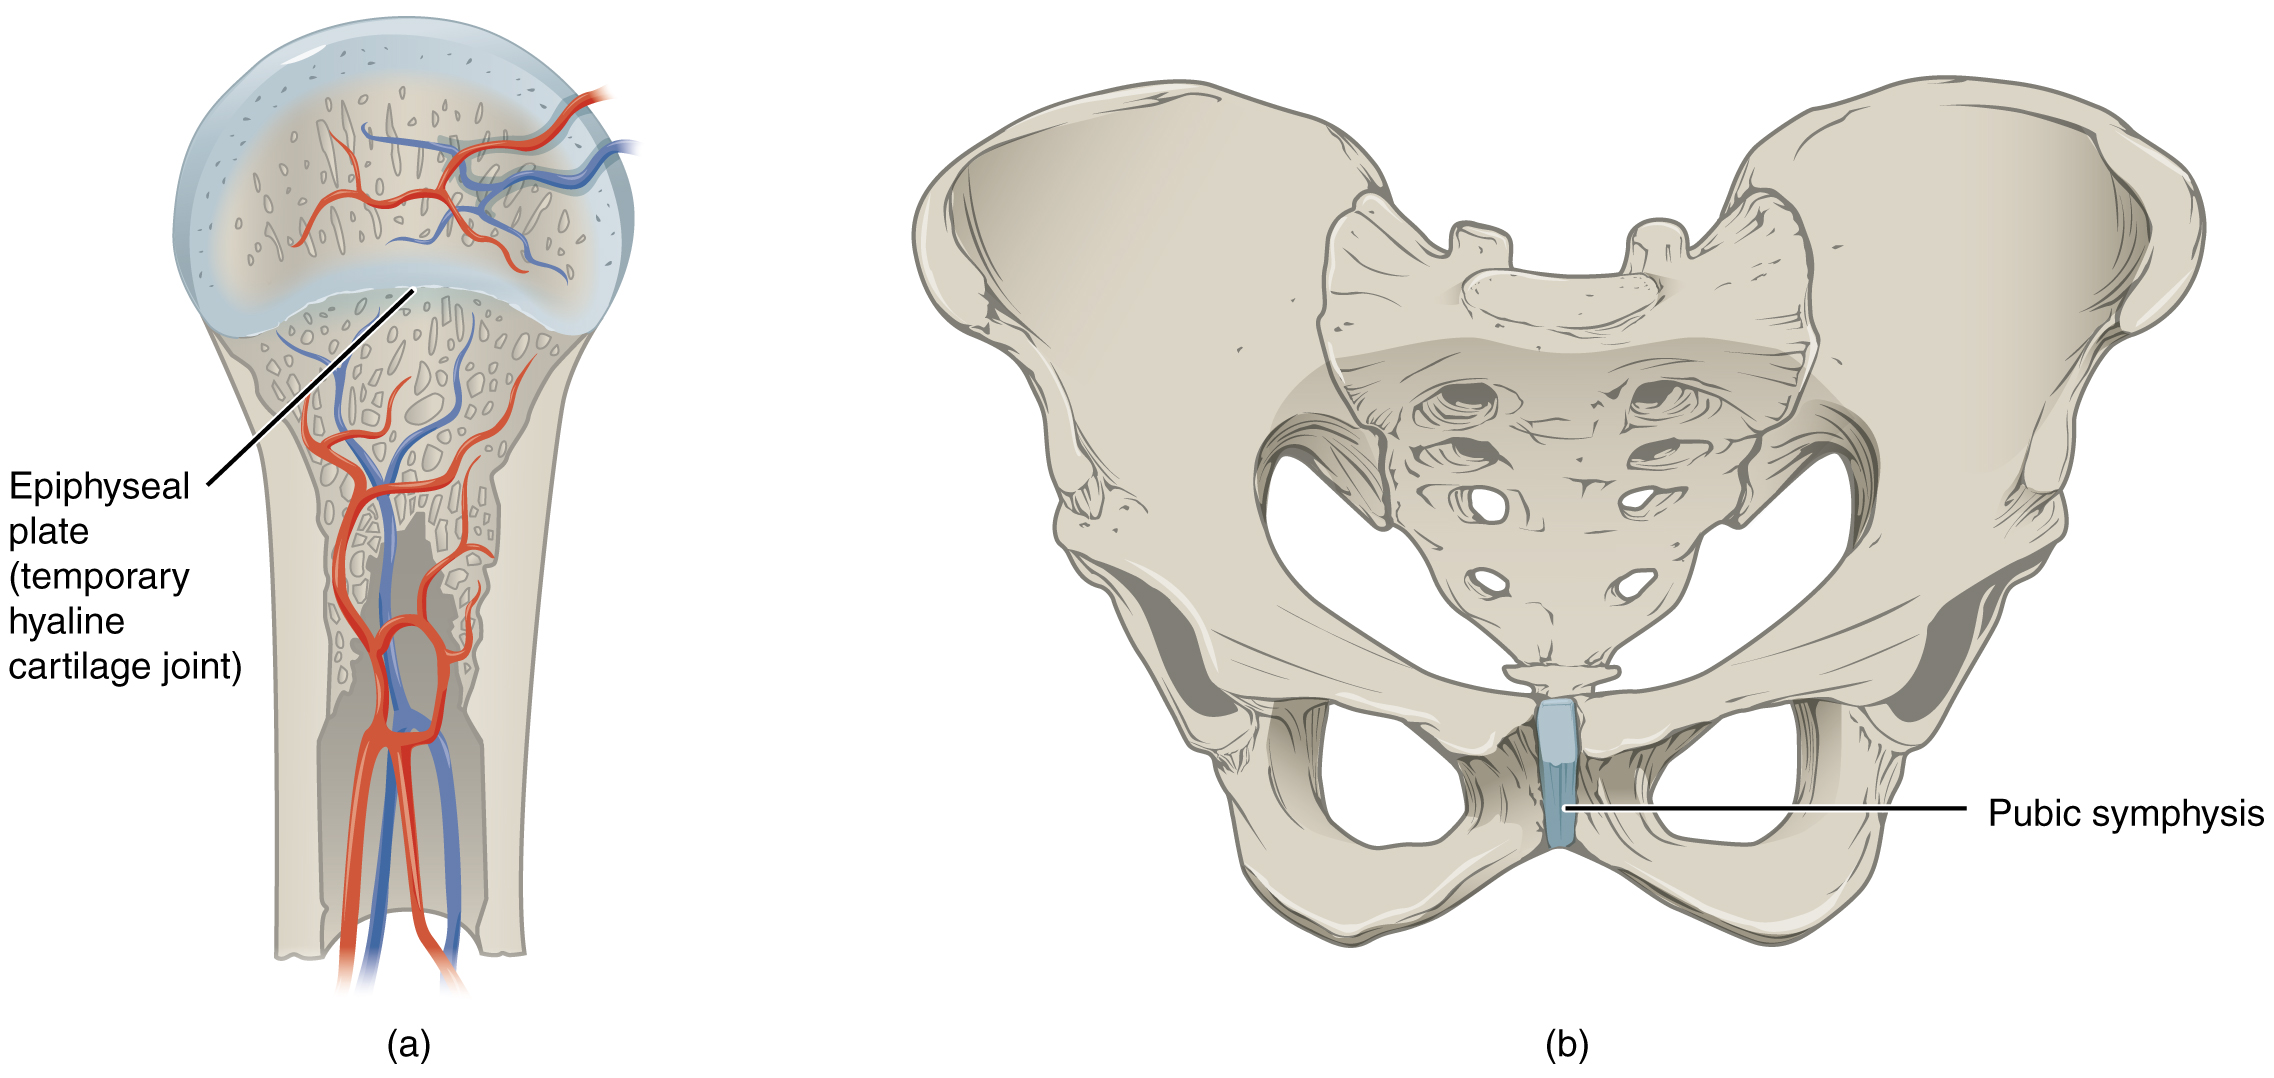 This figure shows the cartilaginous joints. The left panel shows a hyaline cartilage joint, and the right panel shows the fibrocartilaginous joint of the pubic symphisis.